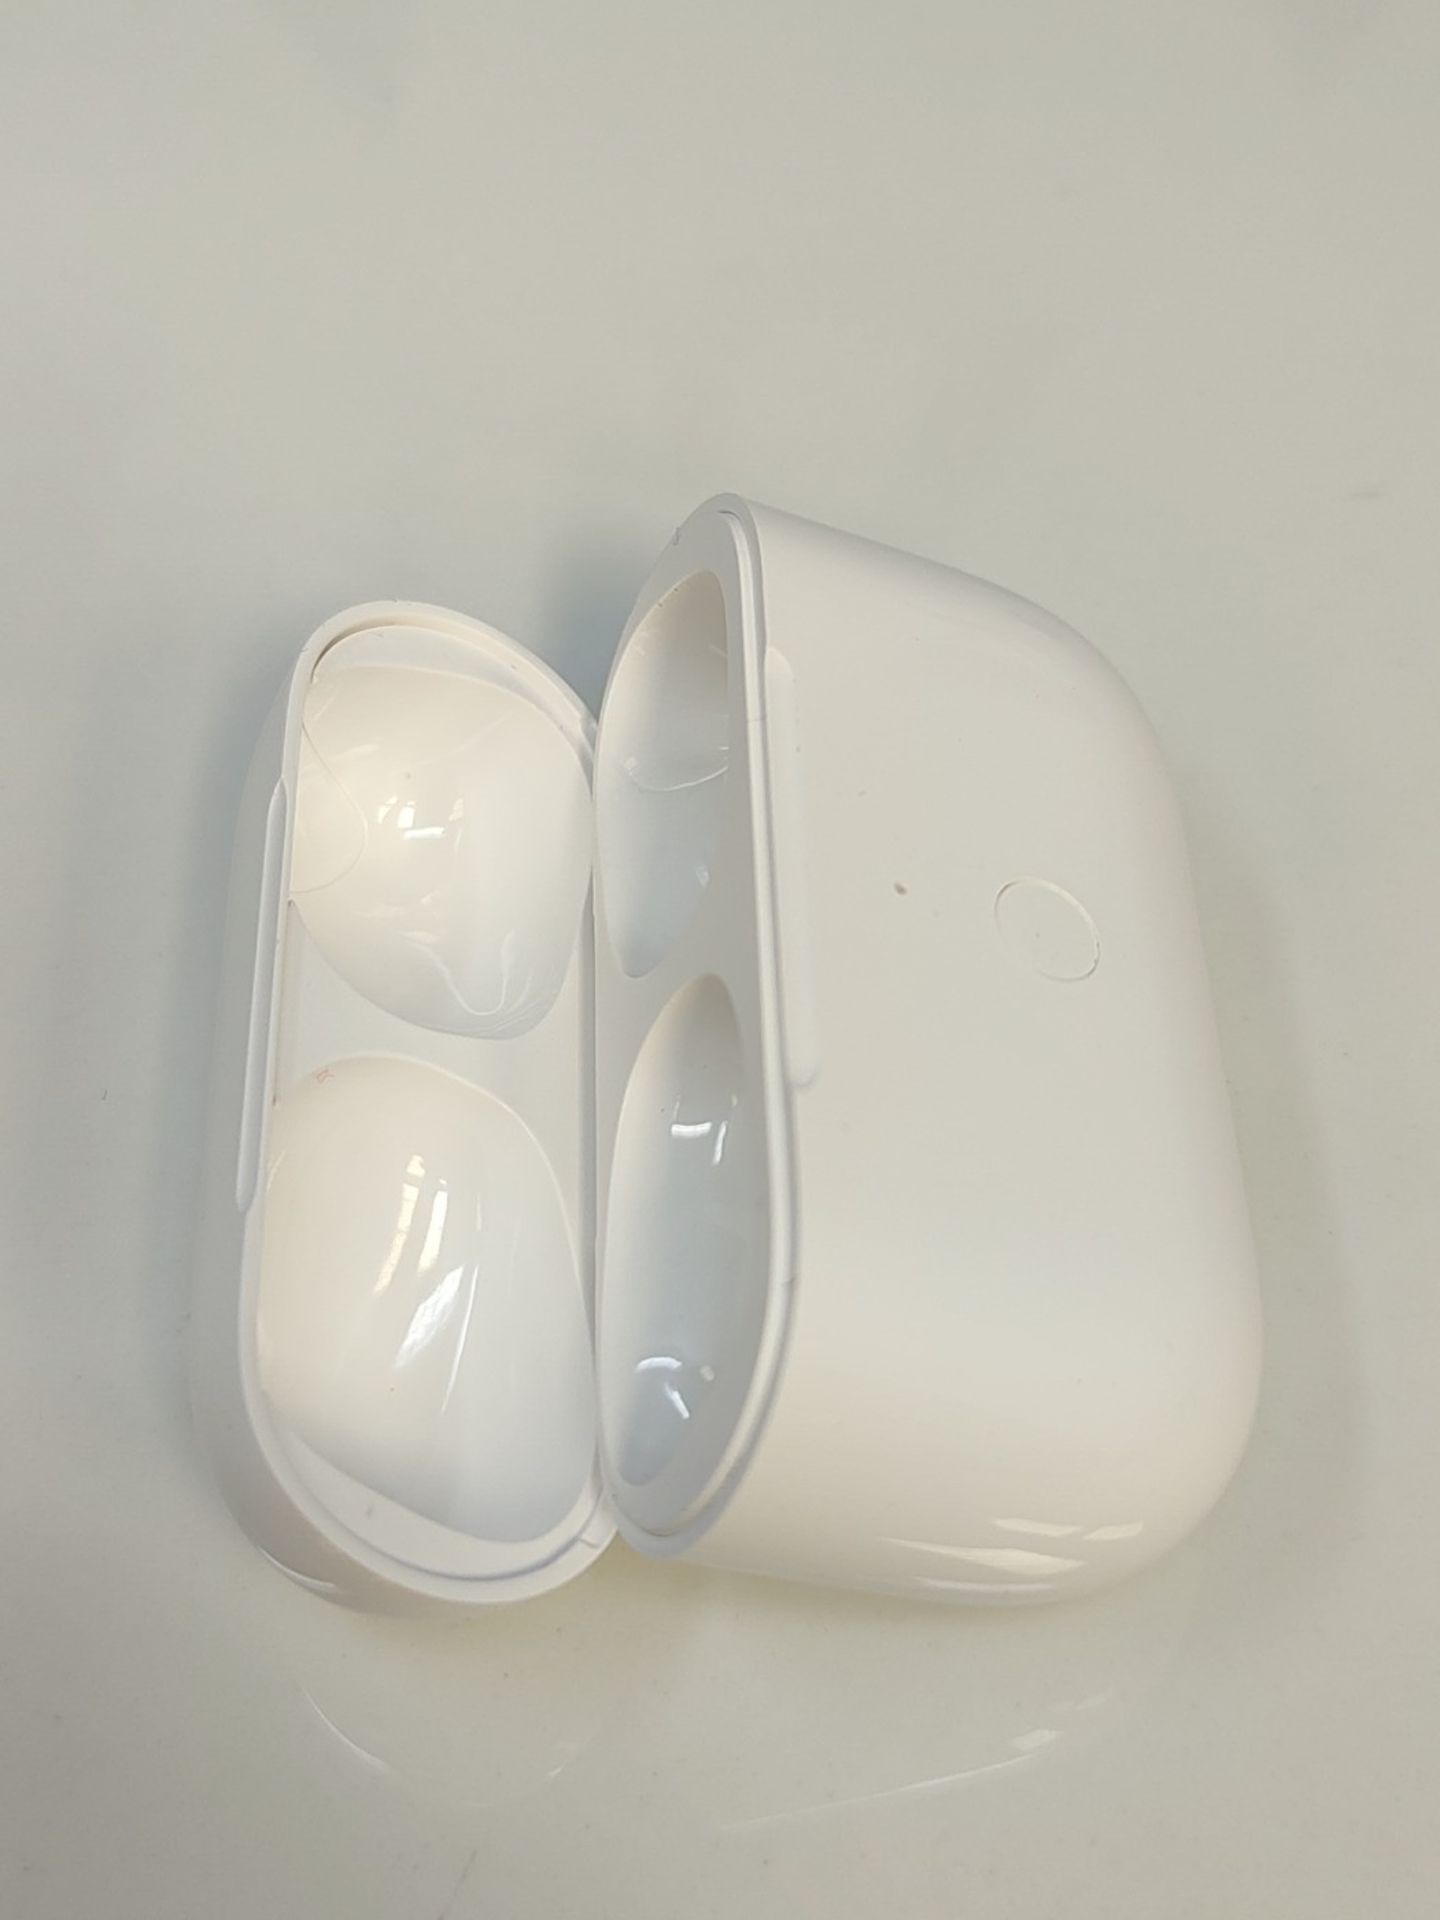 Wireless Charging Case for AirPods Pro 1 and AirPods Pro 2, Replacement Charging Case - Image 6 of 6